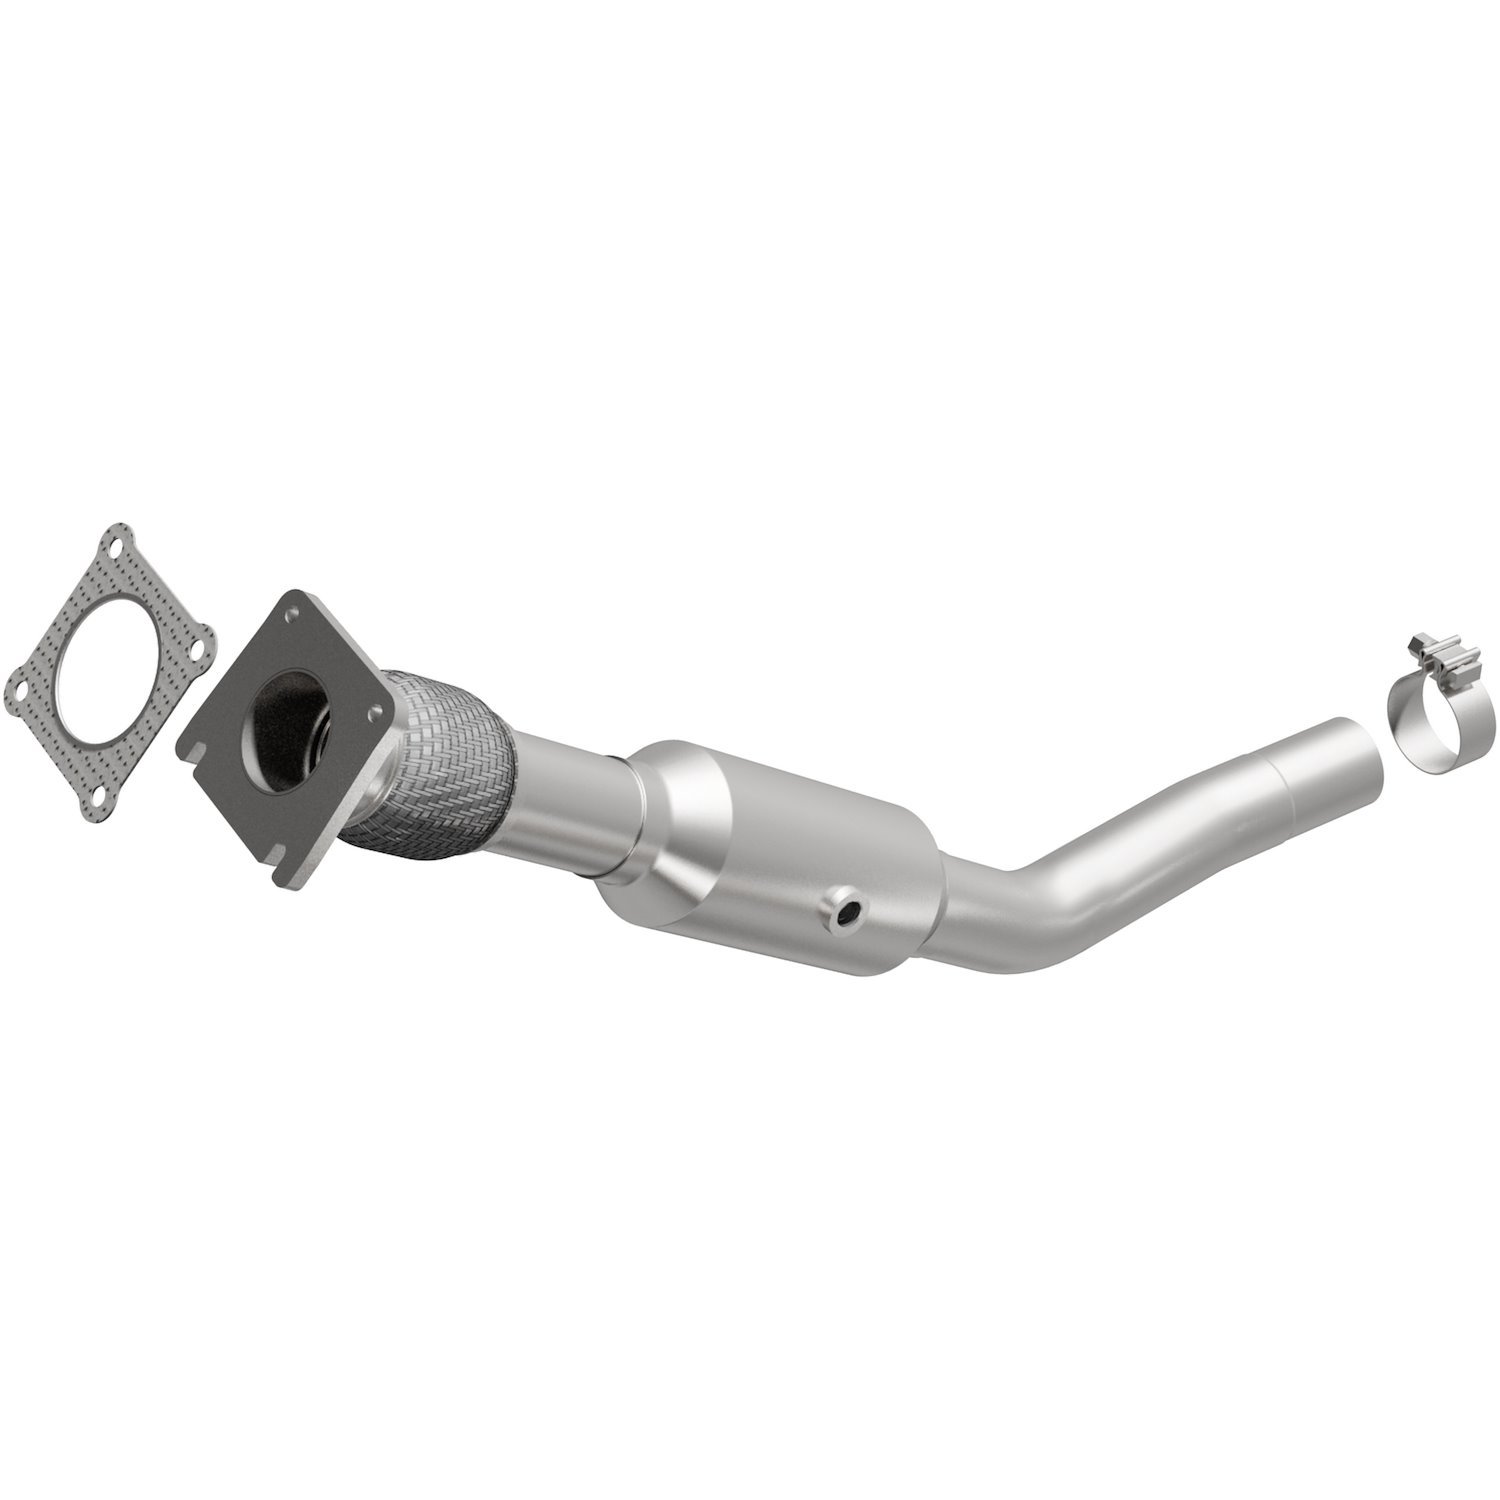 2005-2008 Chrysler Pacifica OEM Grade Federal / EPA Compliant Direct-Fit Catalytic Converter